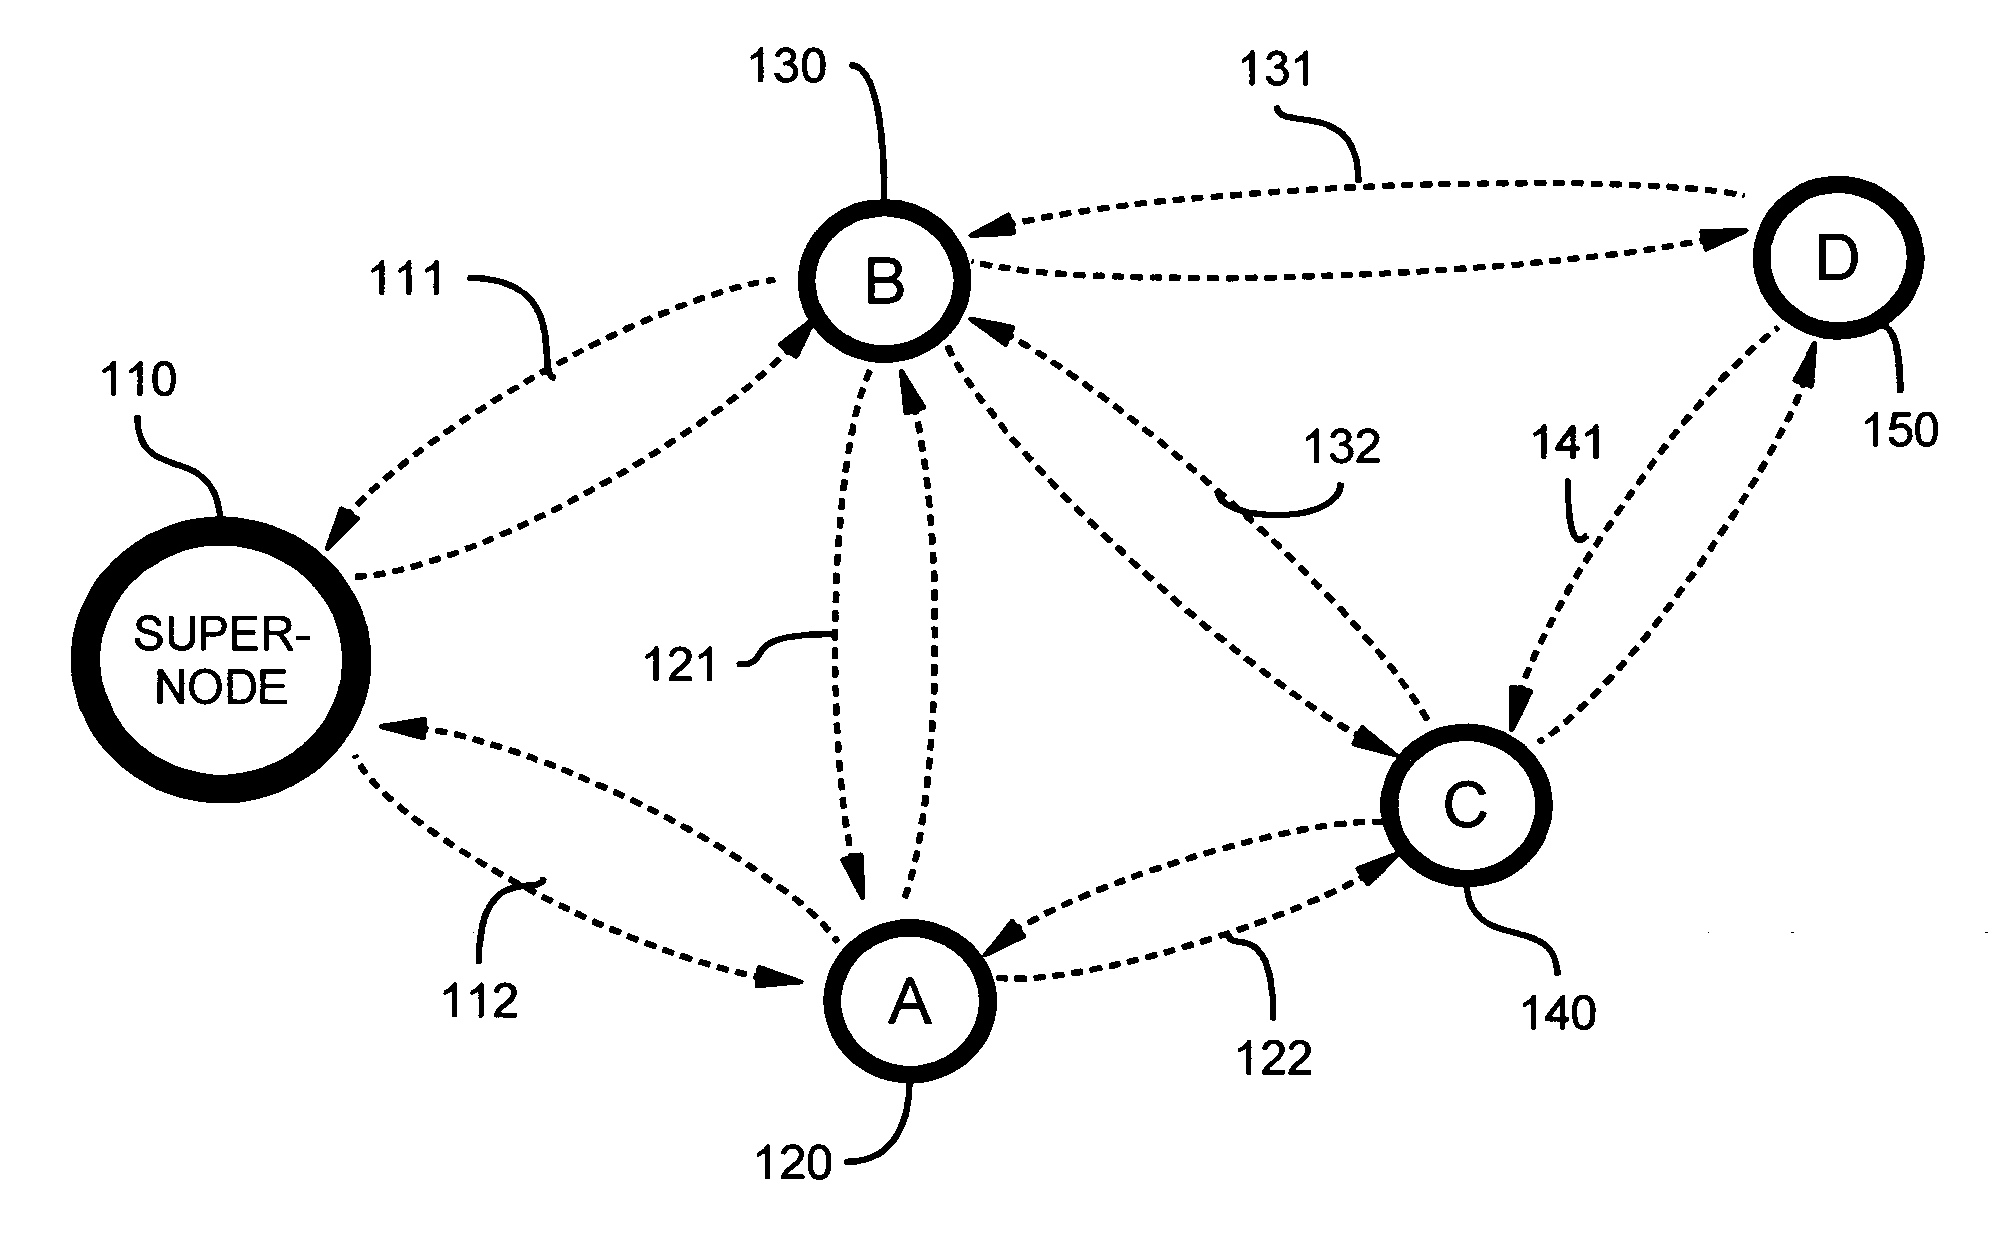 Device discovery and channel selection in a wireless networking environment